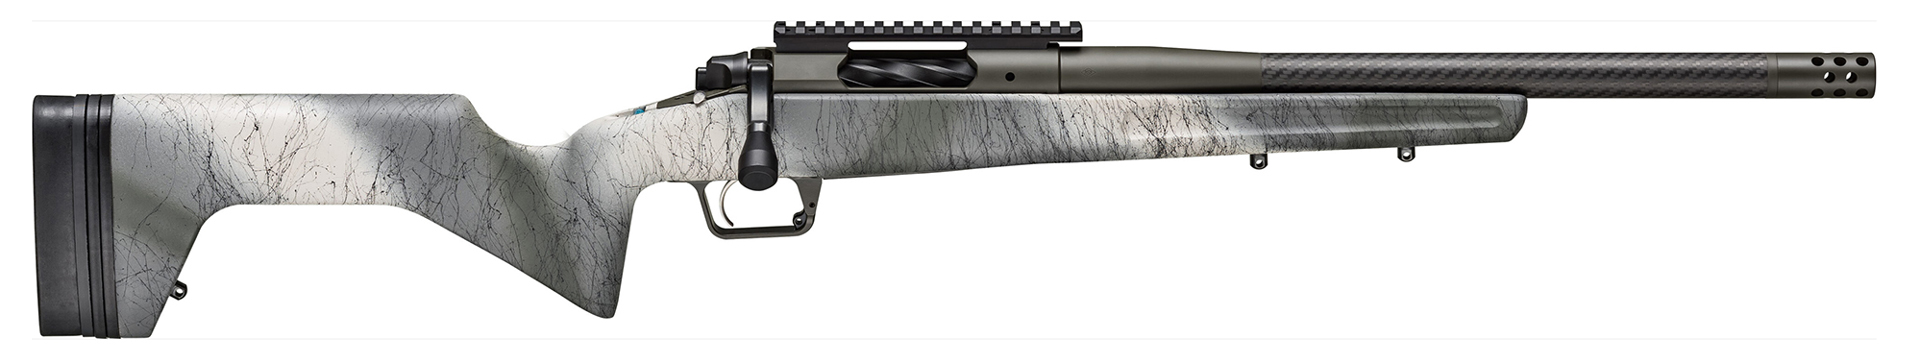 Springfield Armory Redline bolt-action rifle Grayboe camouflage stock carbon-fiber barrel right-side view on white